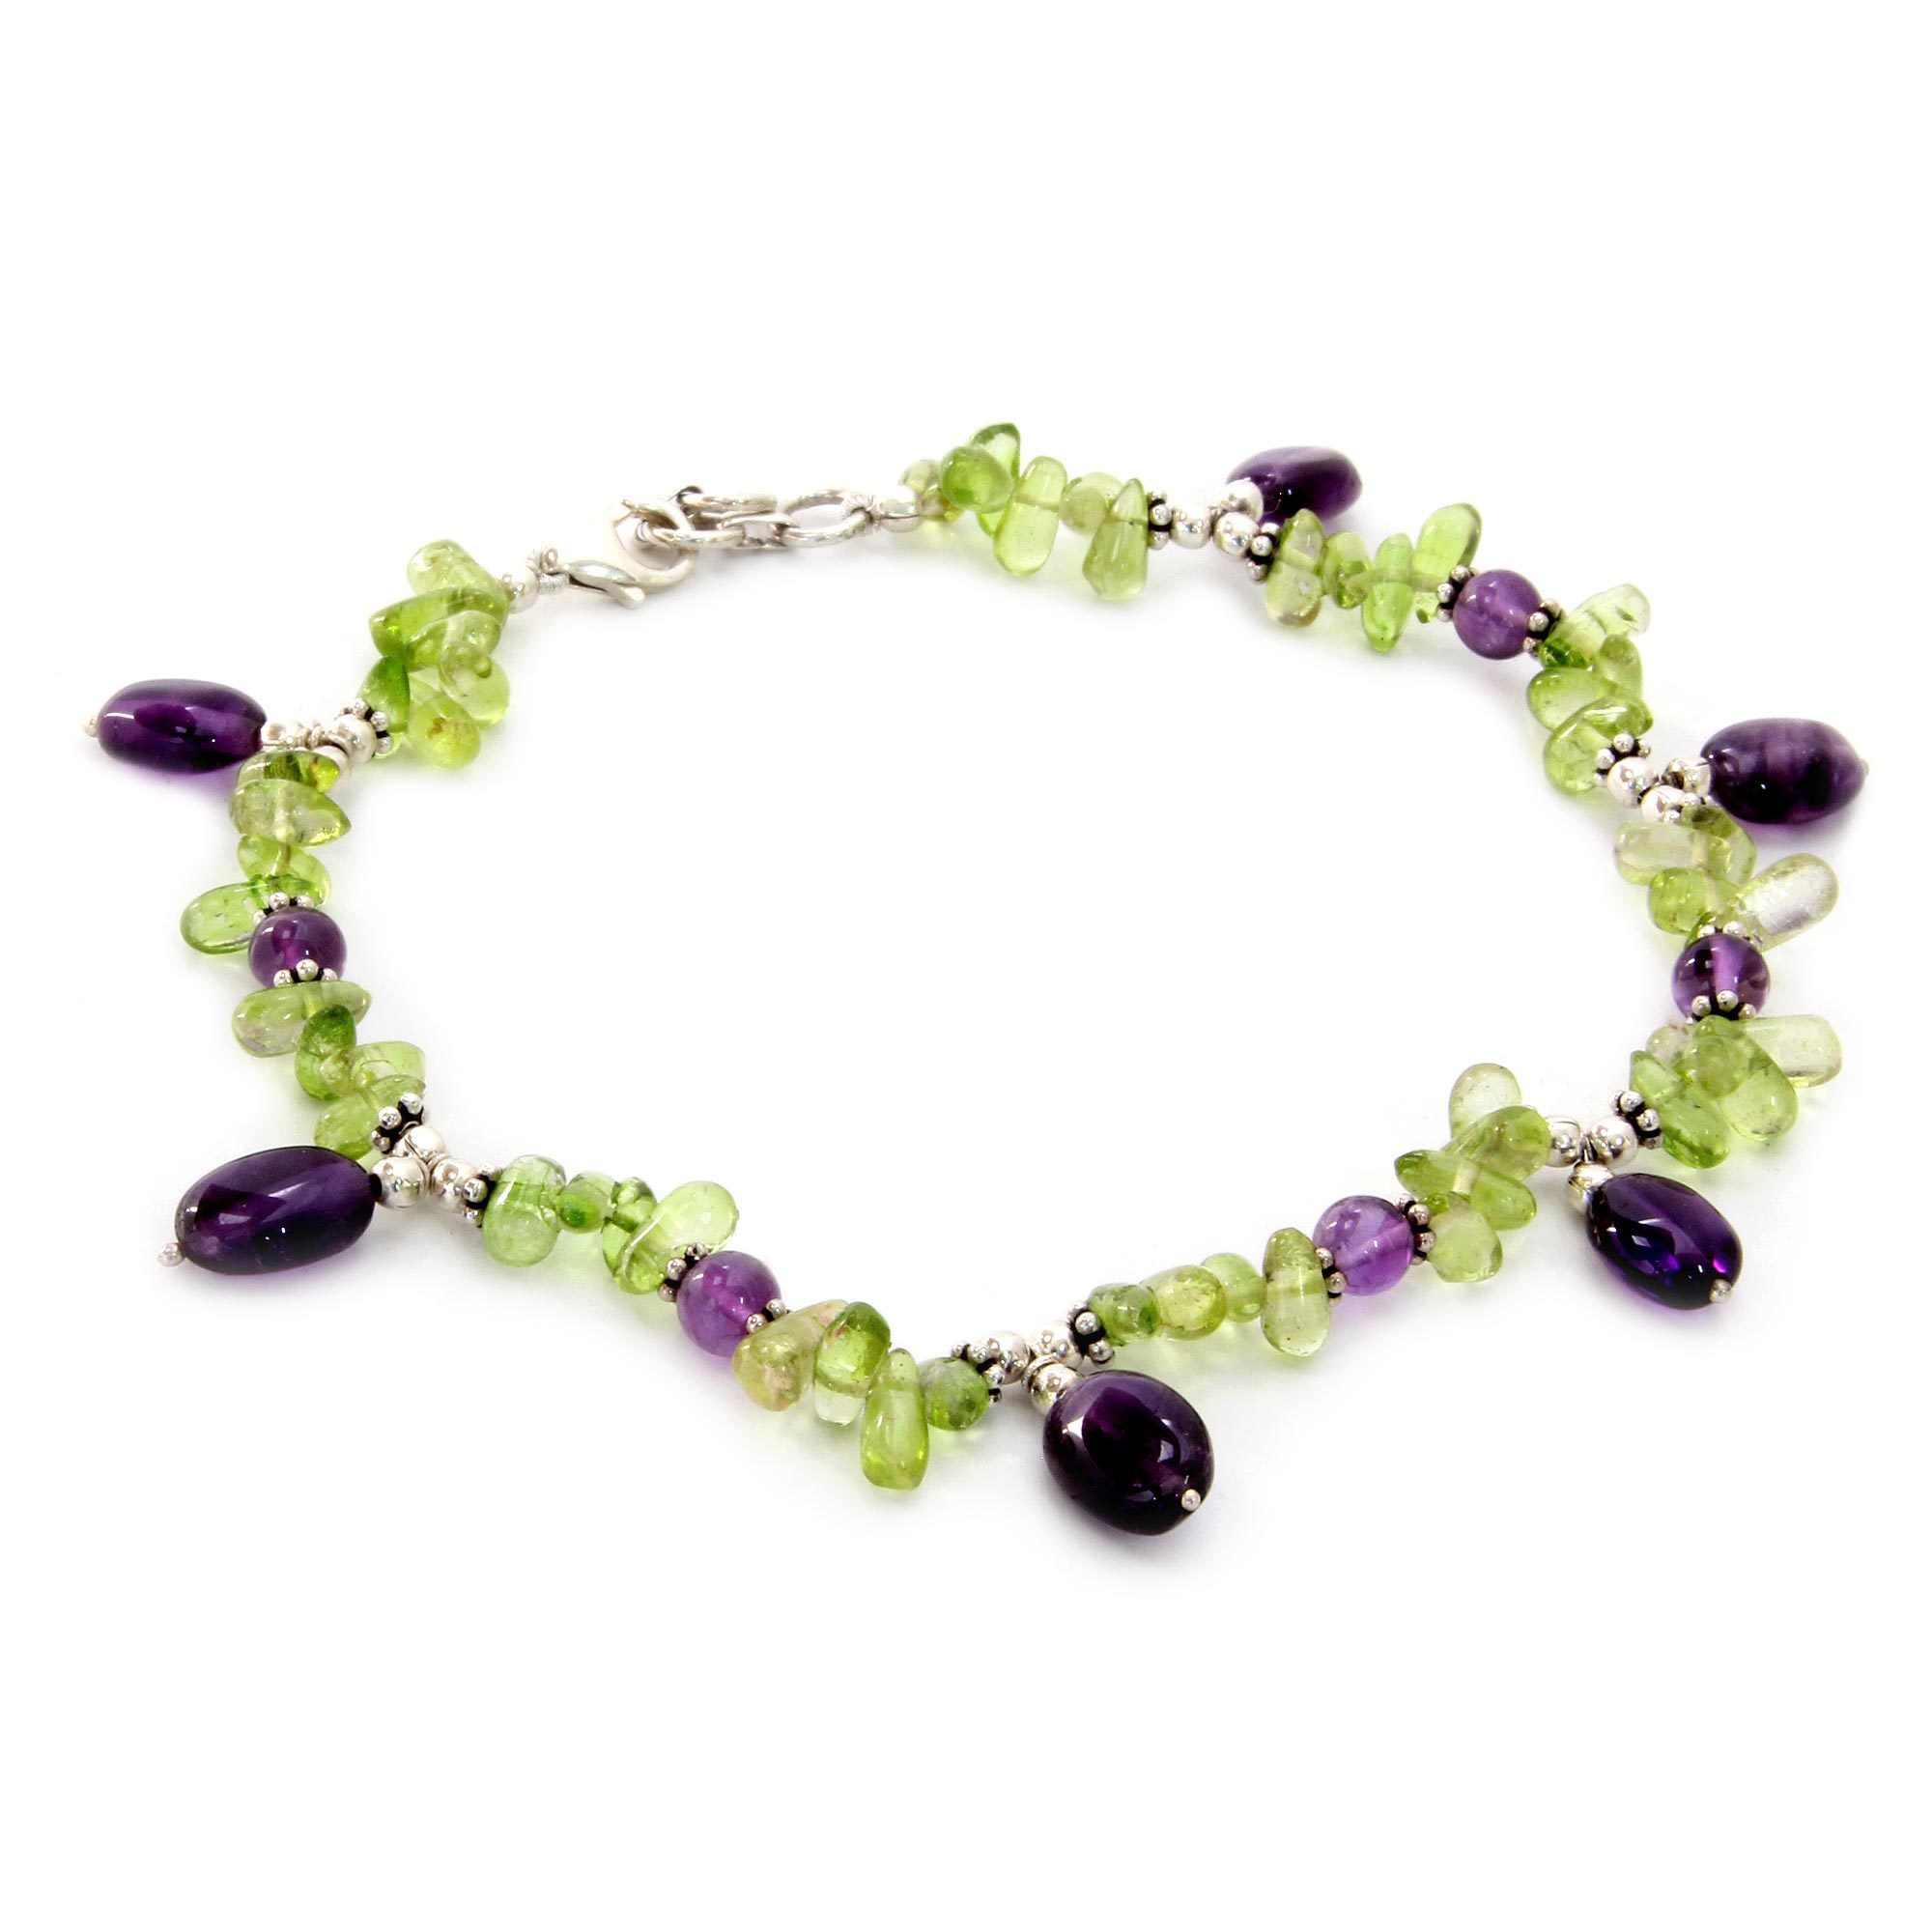 14K White Gold Anklet Bracelet with Purple Amethyst Gemstones 10 Inches